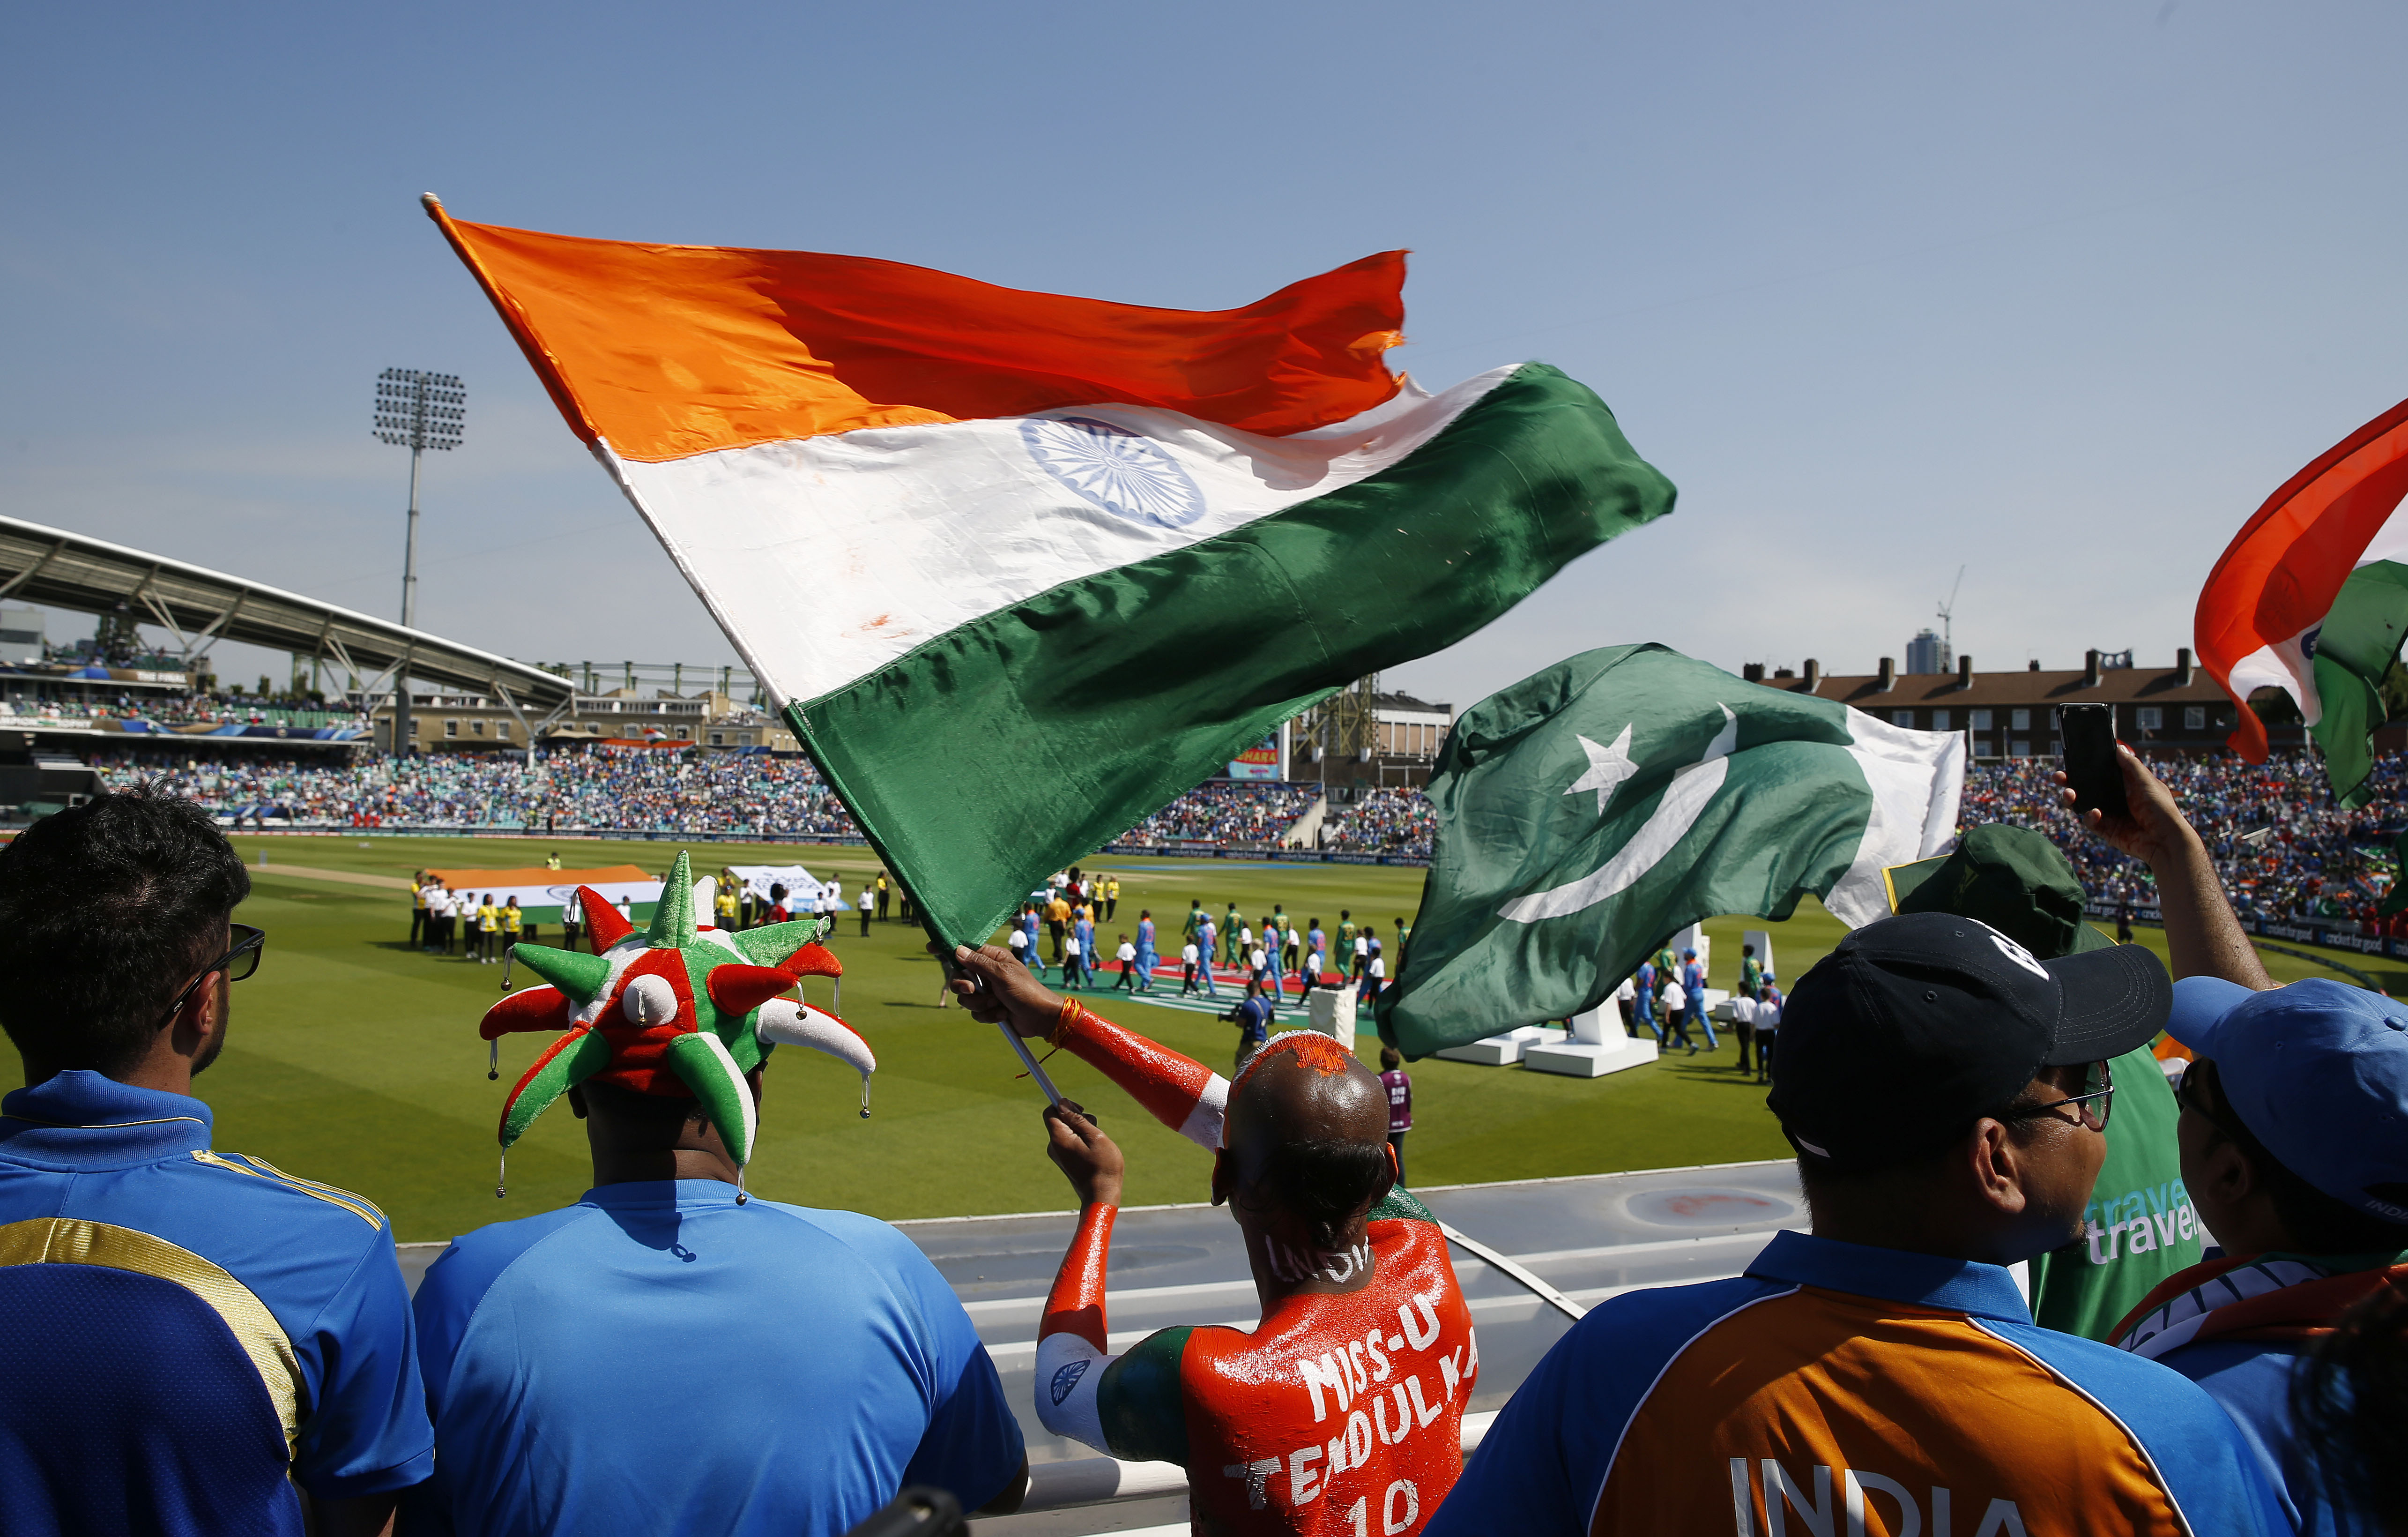 Cricket: India win toss, elect to field against Pakistan in Champions Trophy final